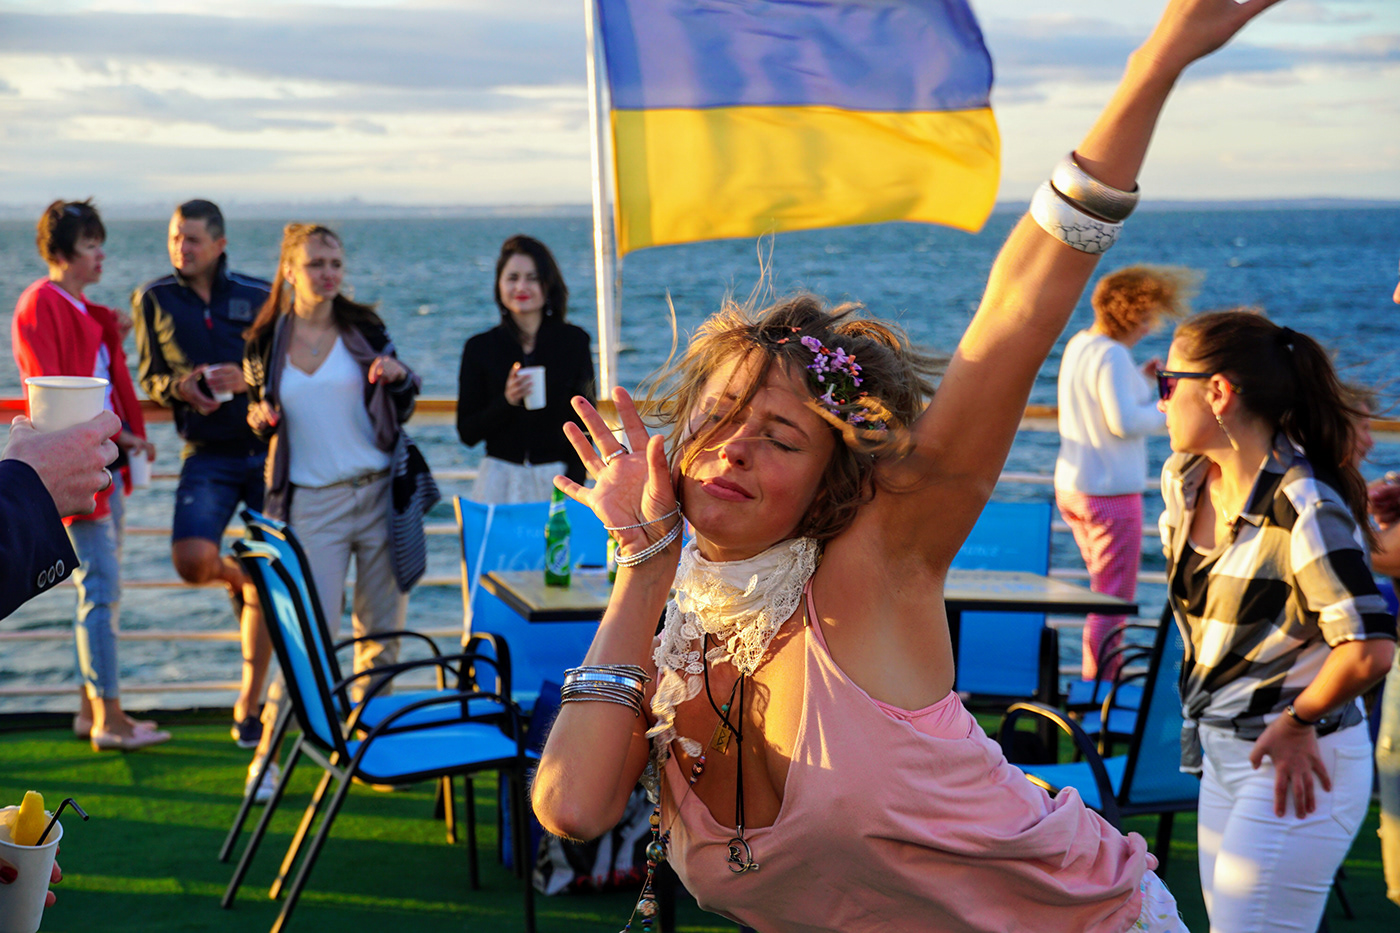 Odessa ukraine Boat Party Octopus Party sunset yacht boat